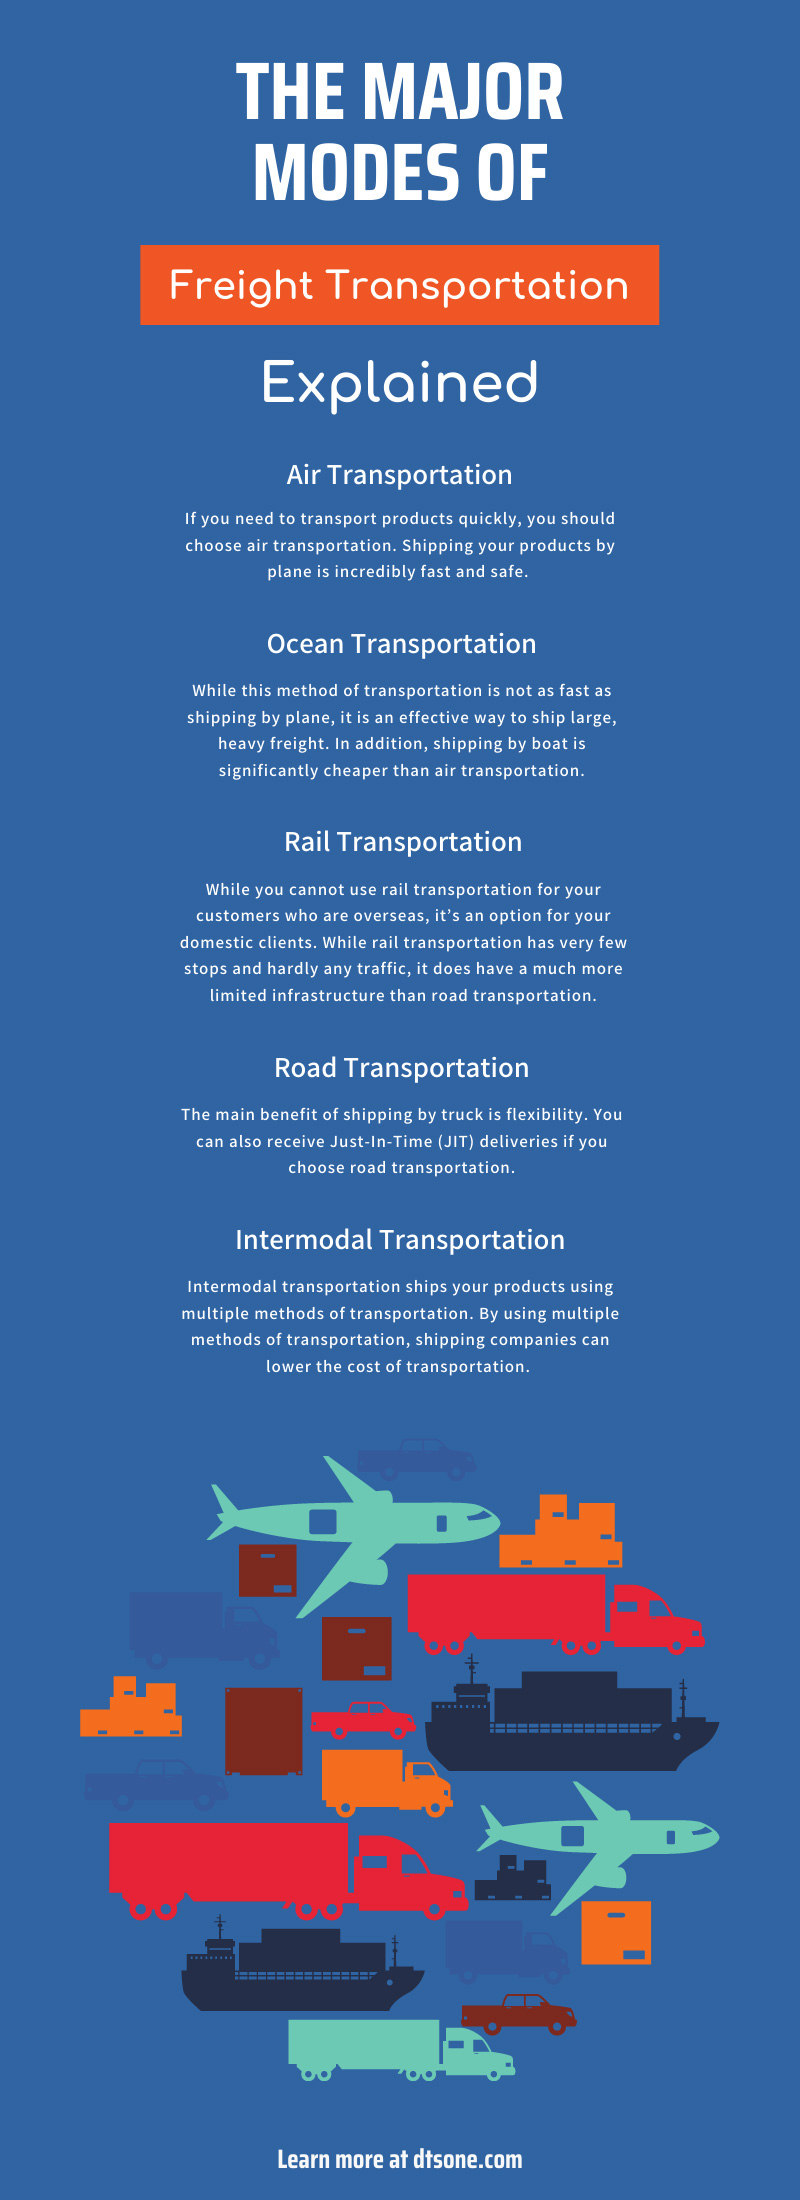 The Major Modes of Freight Transportation Explained